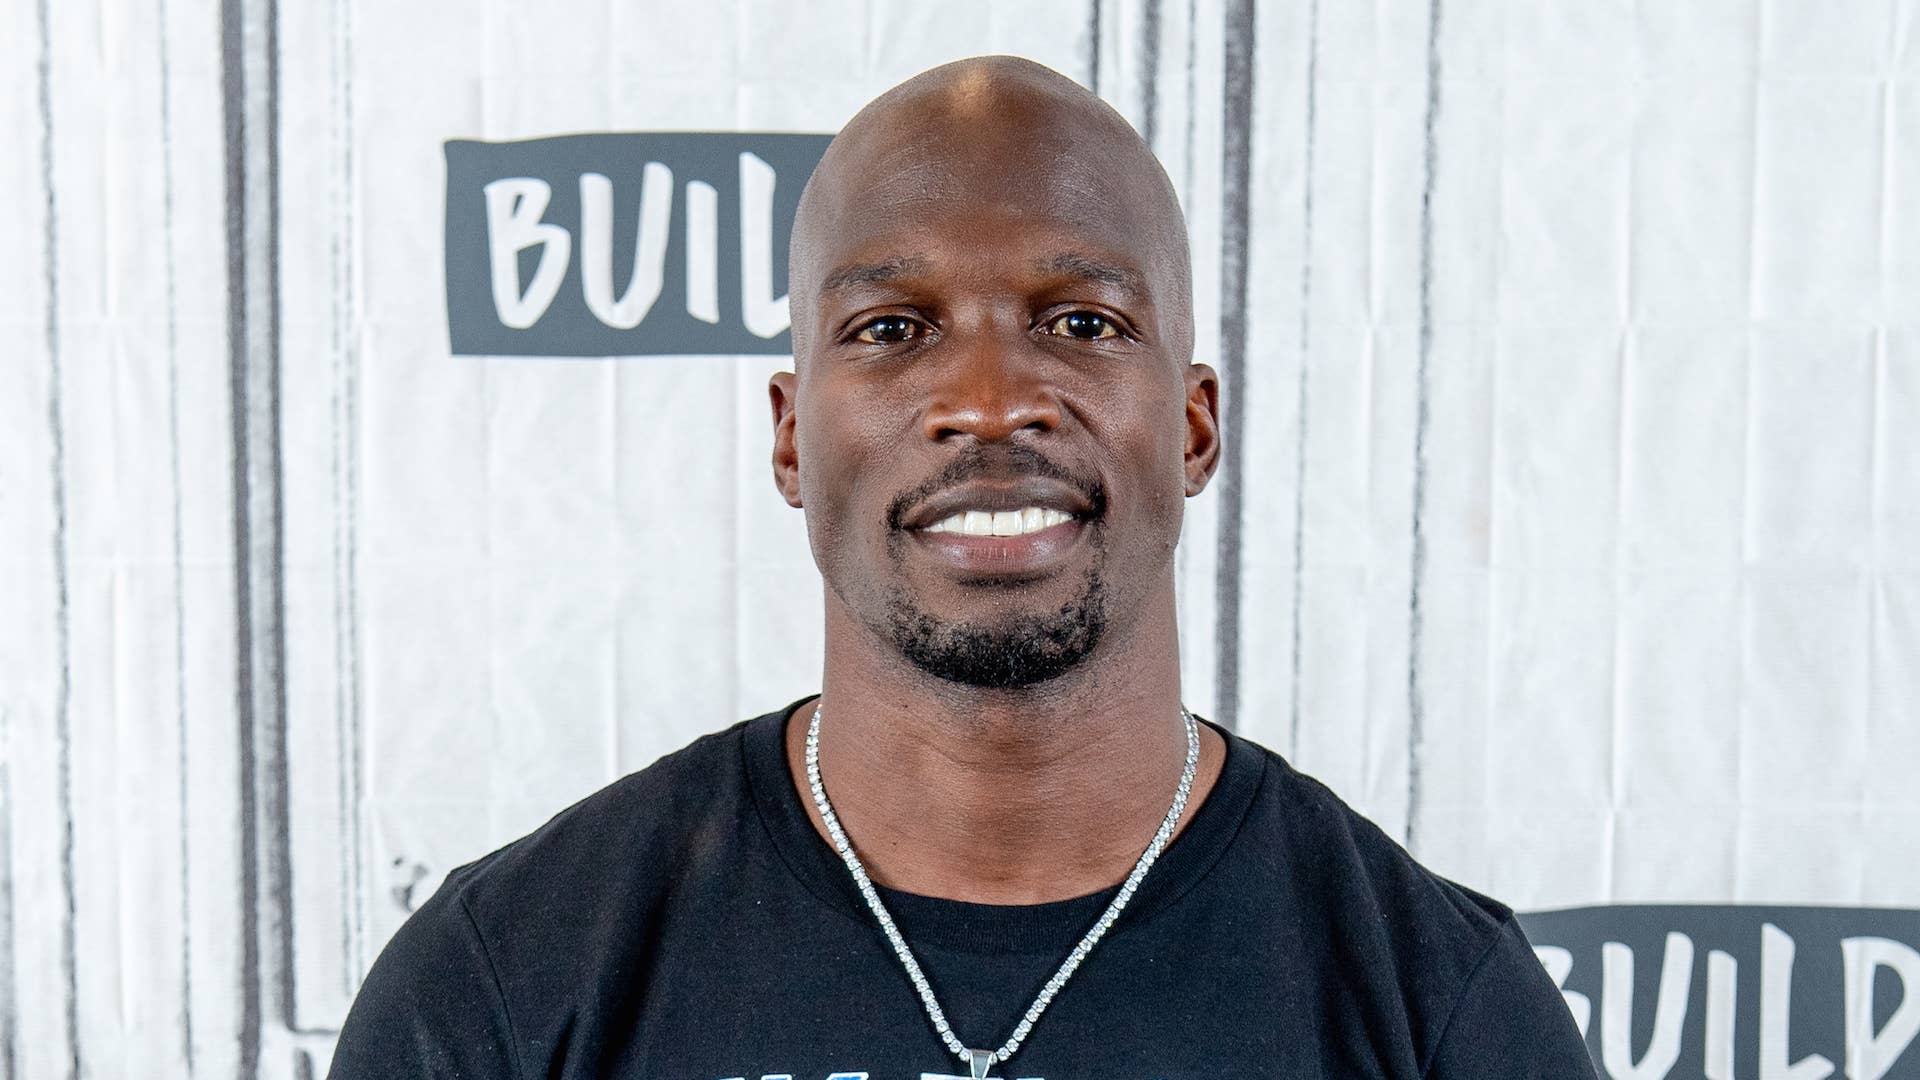 NFL Star Chad Johnson discusses "Warriors of Liberty City" with the Build Series